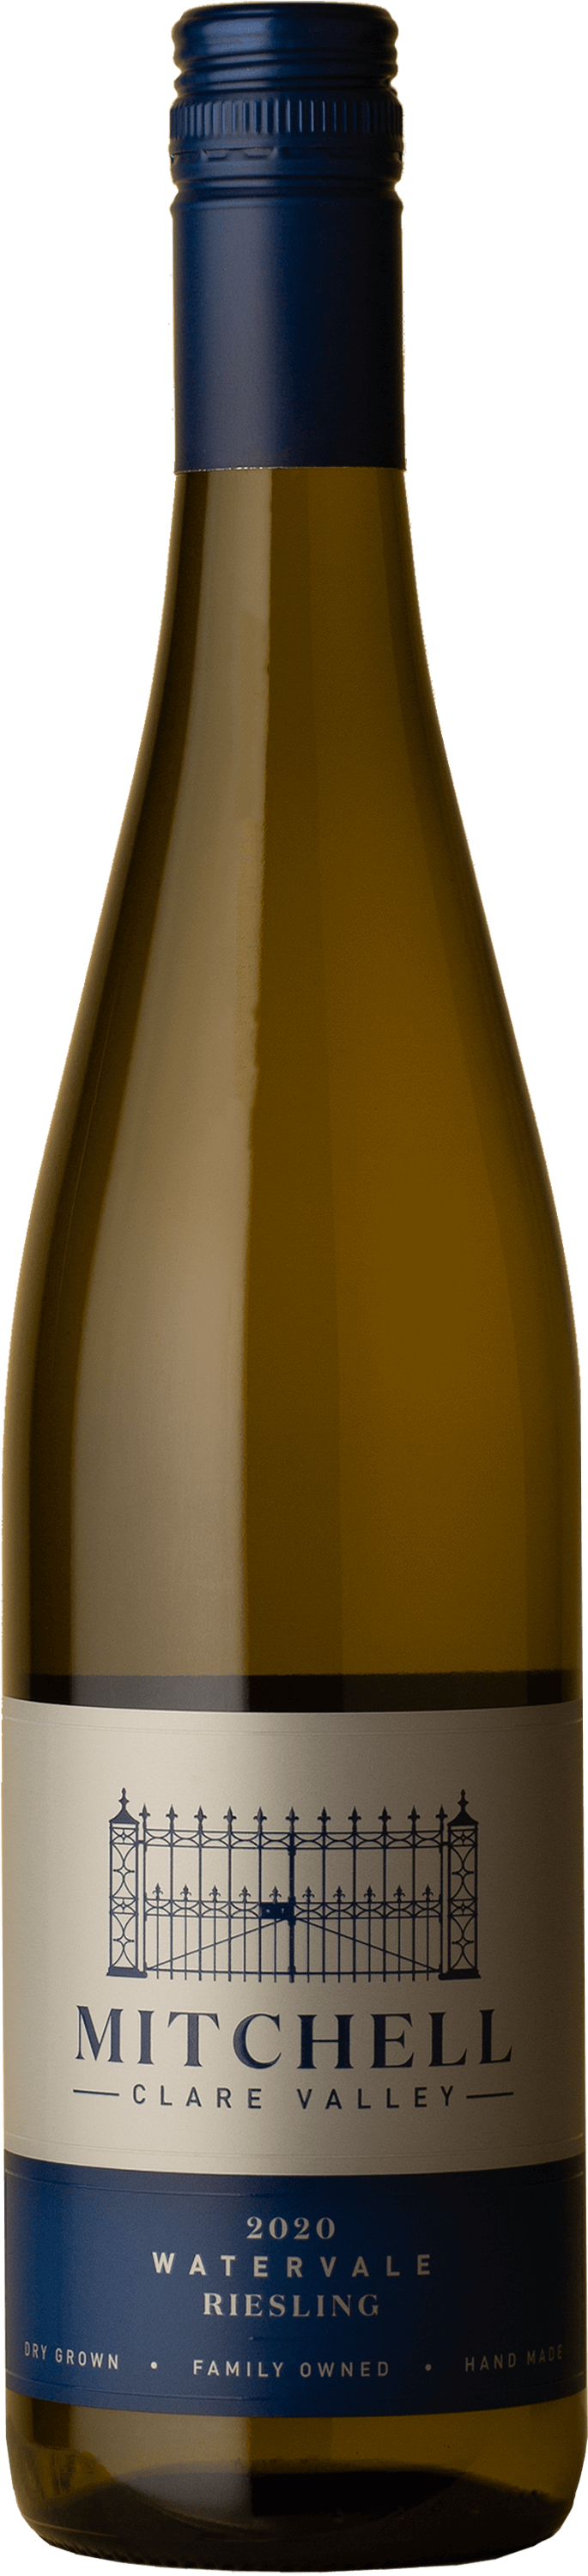 Mitchell - Watervale Riesling 2020 White Wine